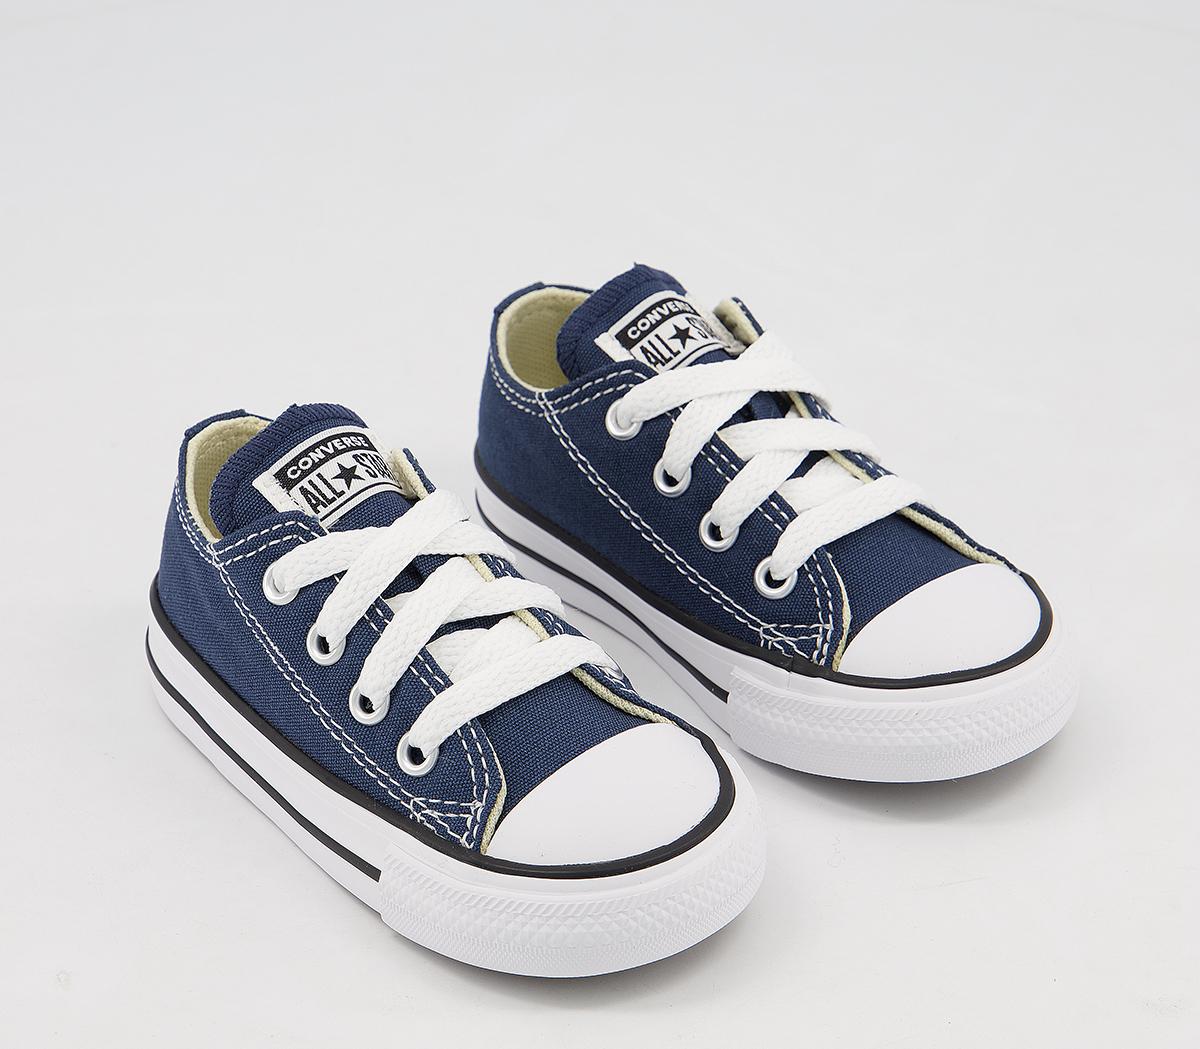 Kids Converse Baby Boys All Star Low Infant Shoes In Navy Blue And White, 4 Infant